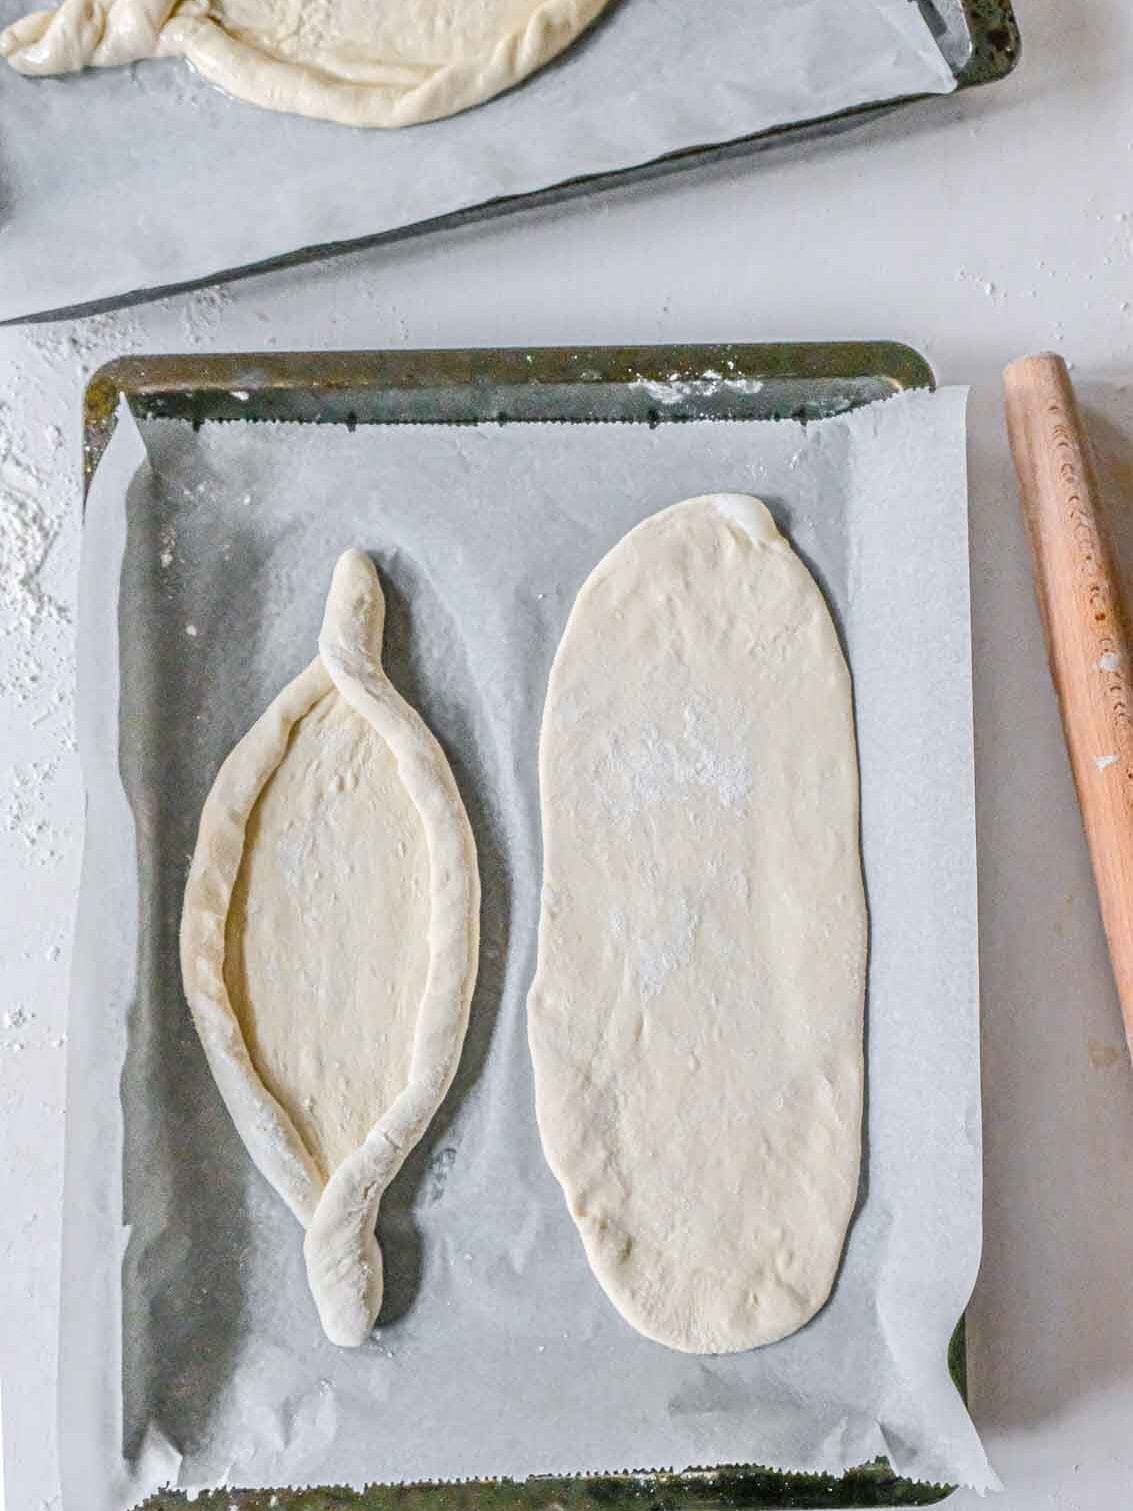 A parchment covered baking tray with one piece of rolled out dough and one piece of rolled out dough shaped into a khachapuri boat ready to be stuffed